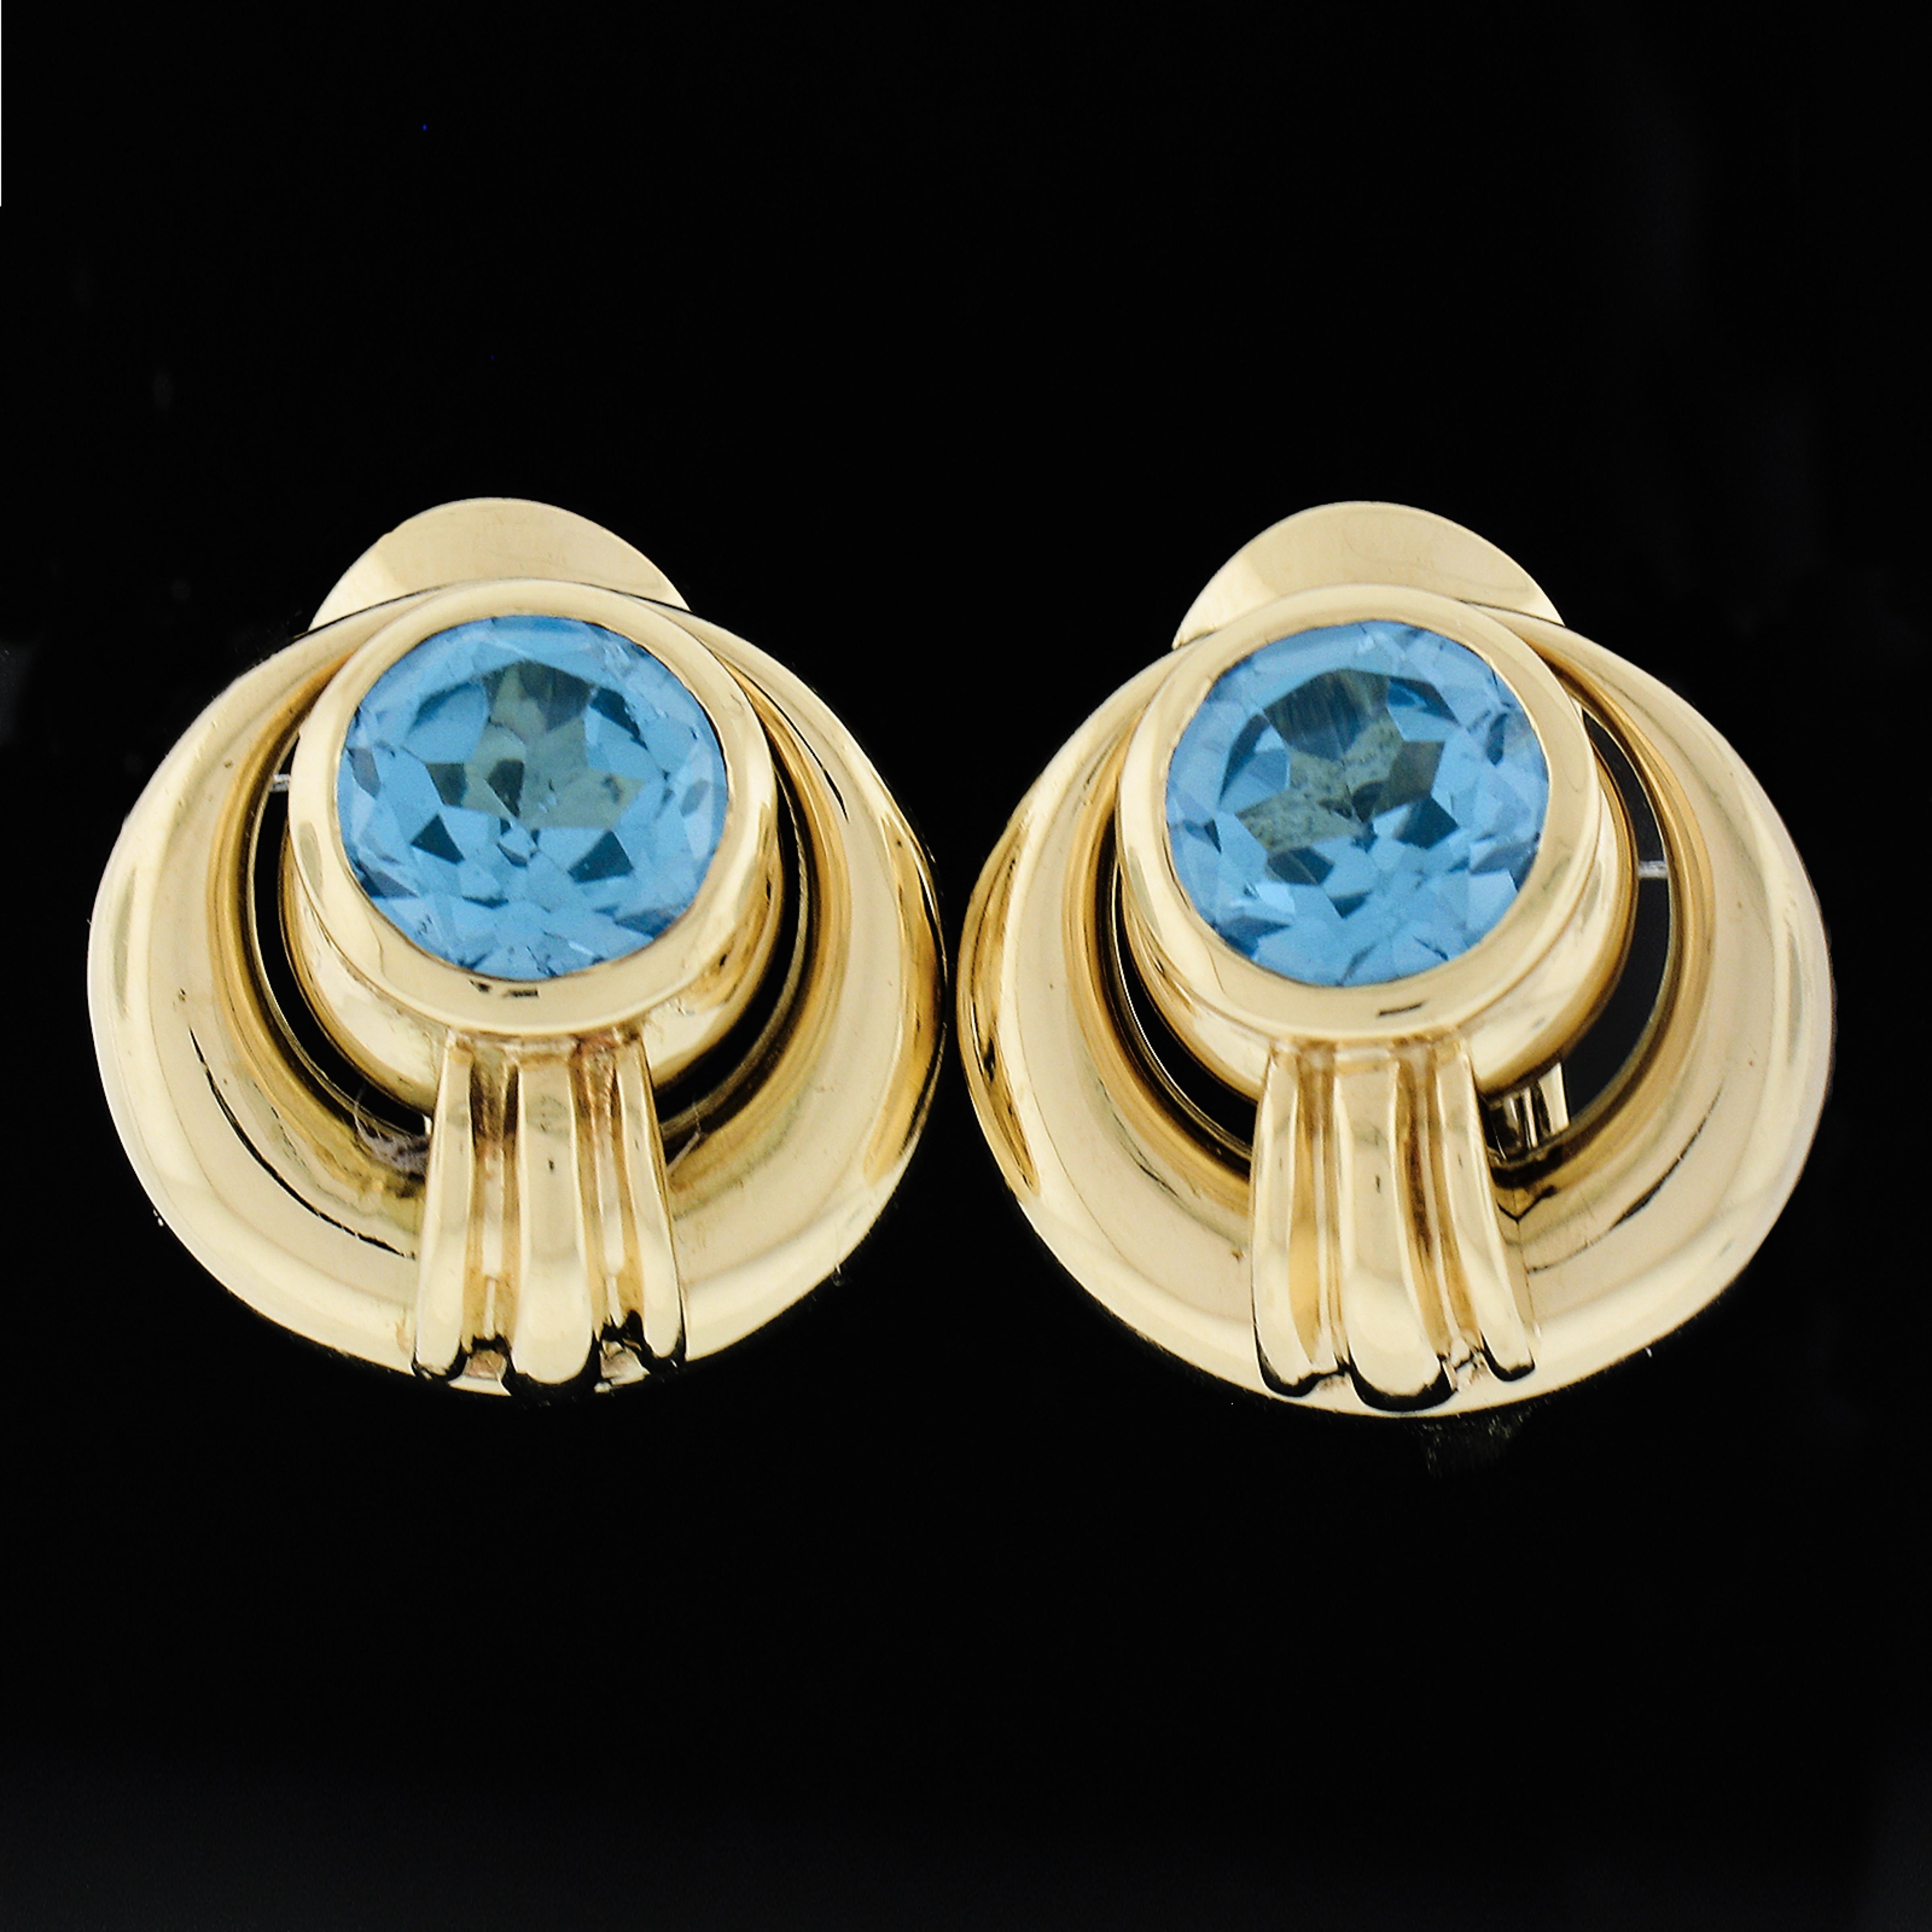 --Stone(s):--
(2) Synthetic Lab Grown Spinel - Round Brilliant Cut - Bezel Set - Vivid Blue Color
** See Certification Details Below for Complete Info **

Material: Solid 18k Yellow Gold w/ White Gold Accents
Weight: 20.26 Grams
Backing: Posts w/